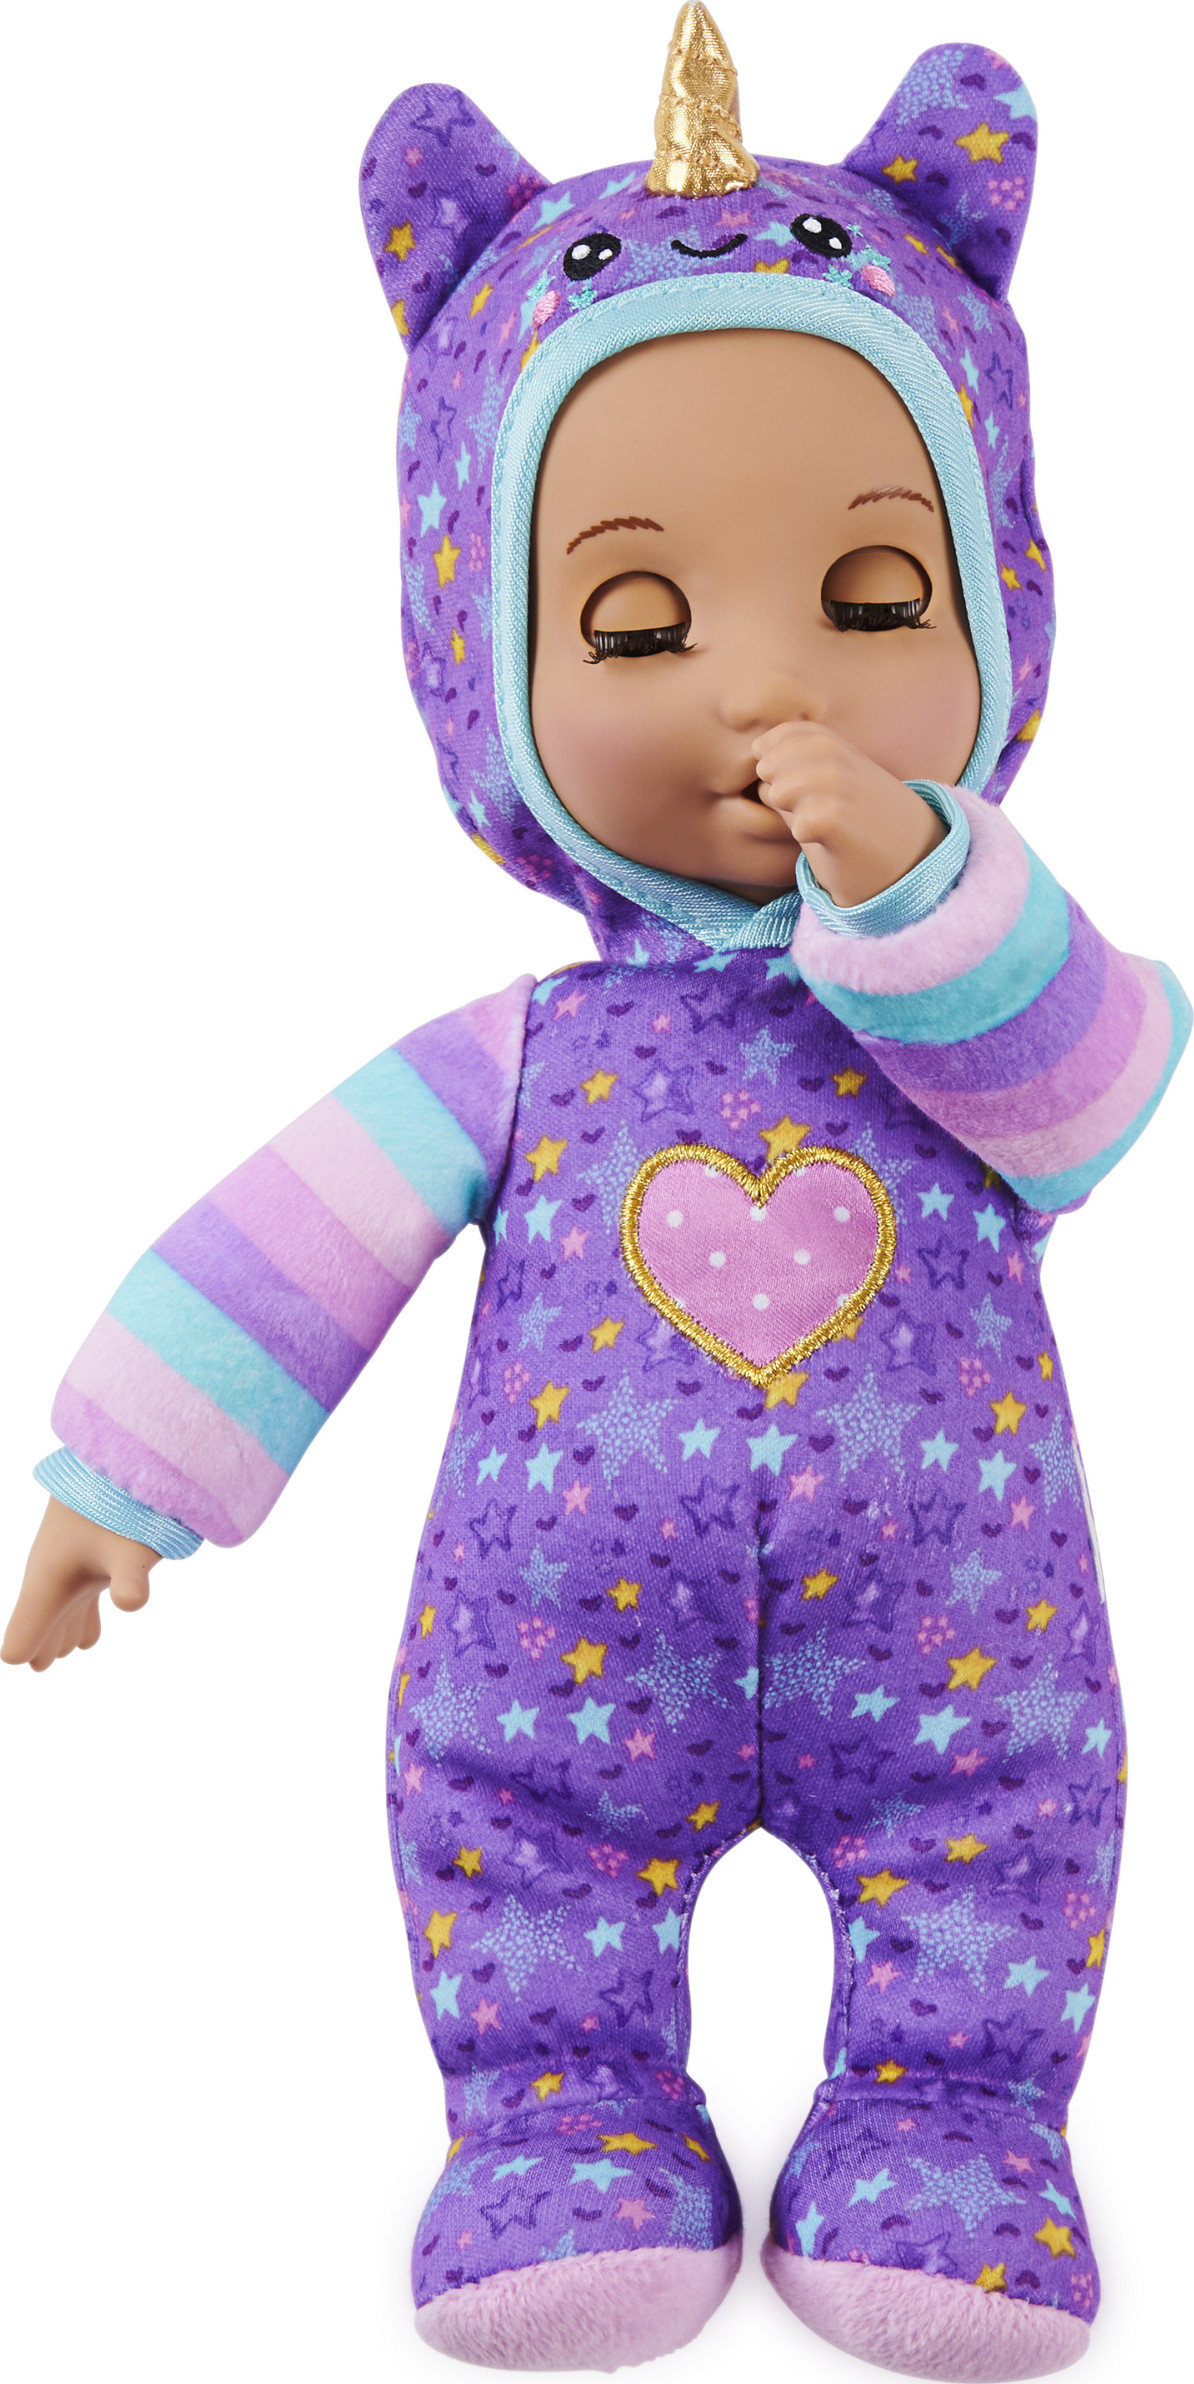 Luvzies by Luvabella, Unicorn Onesie 11-inch Cuddly Baby Doll - image 4 of 5